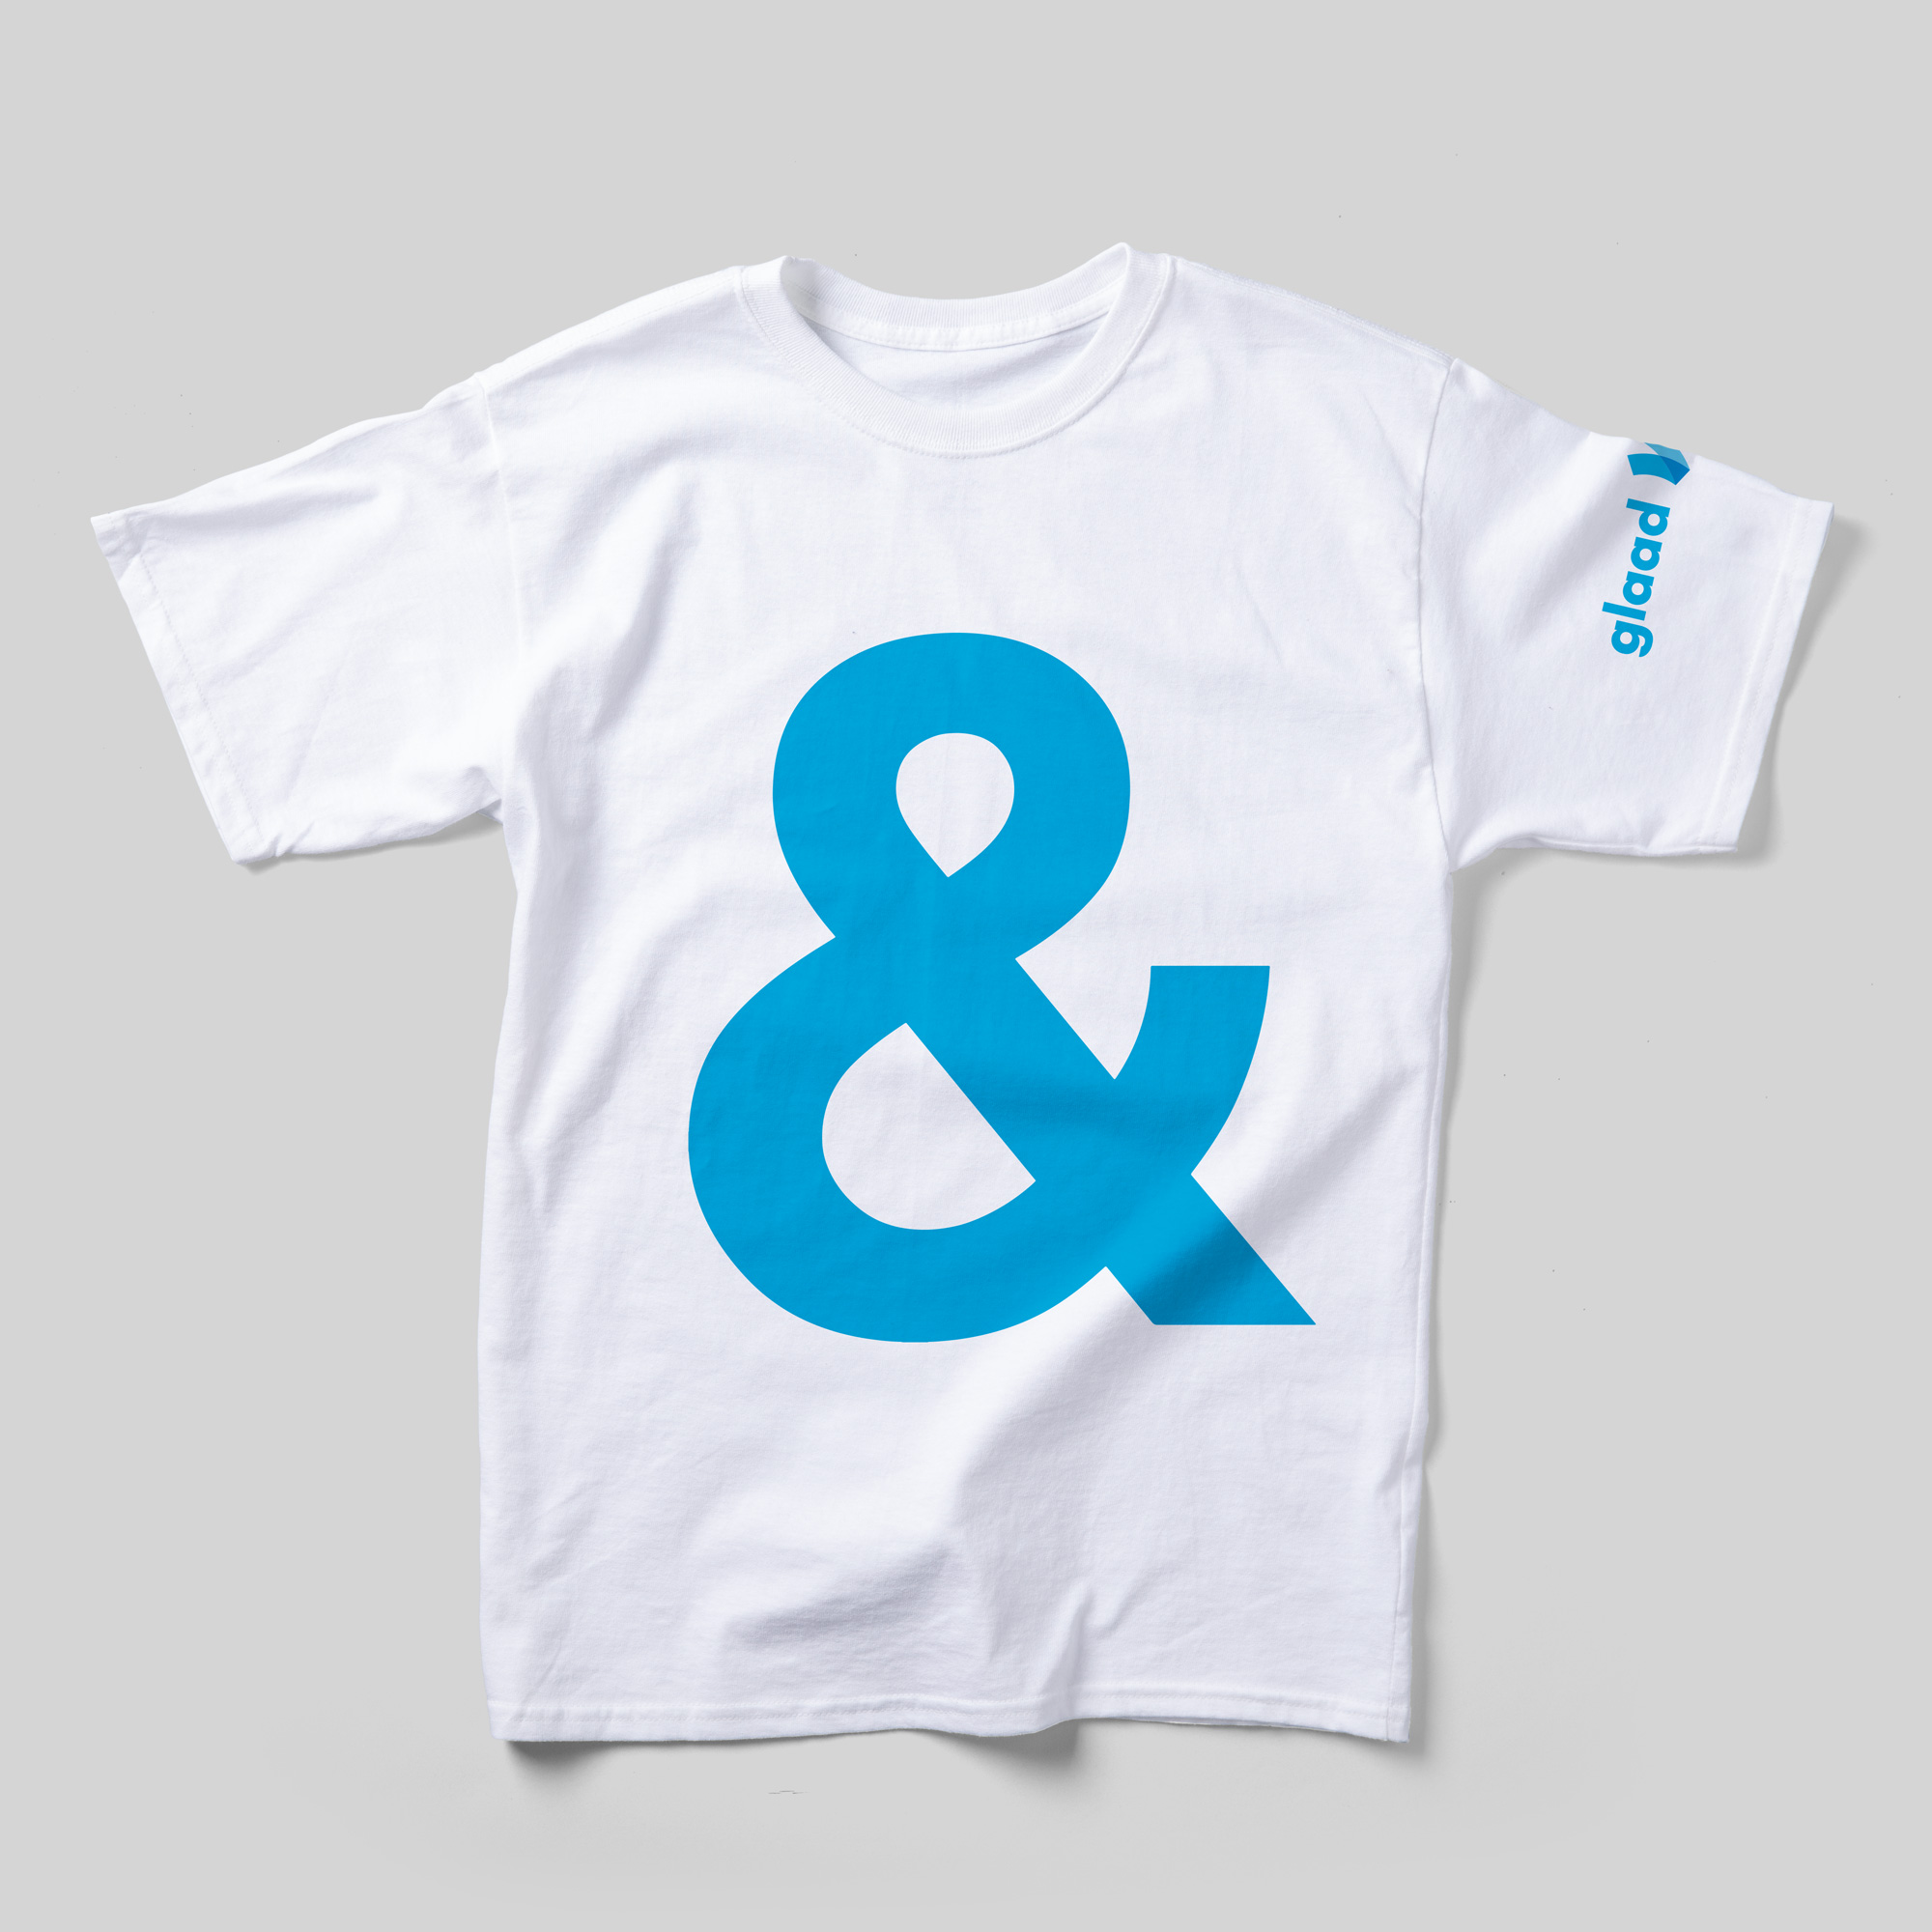 A white t-shirt with a large sky blue ampersand in the center. The GLAAD logo is printed on the sleeve.